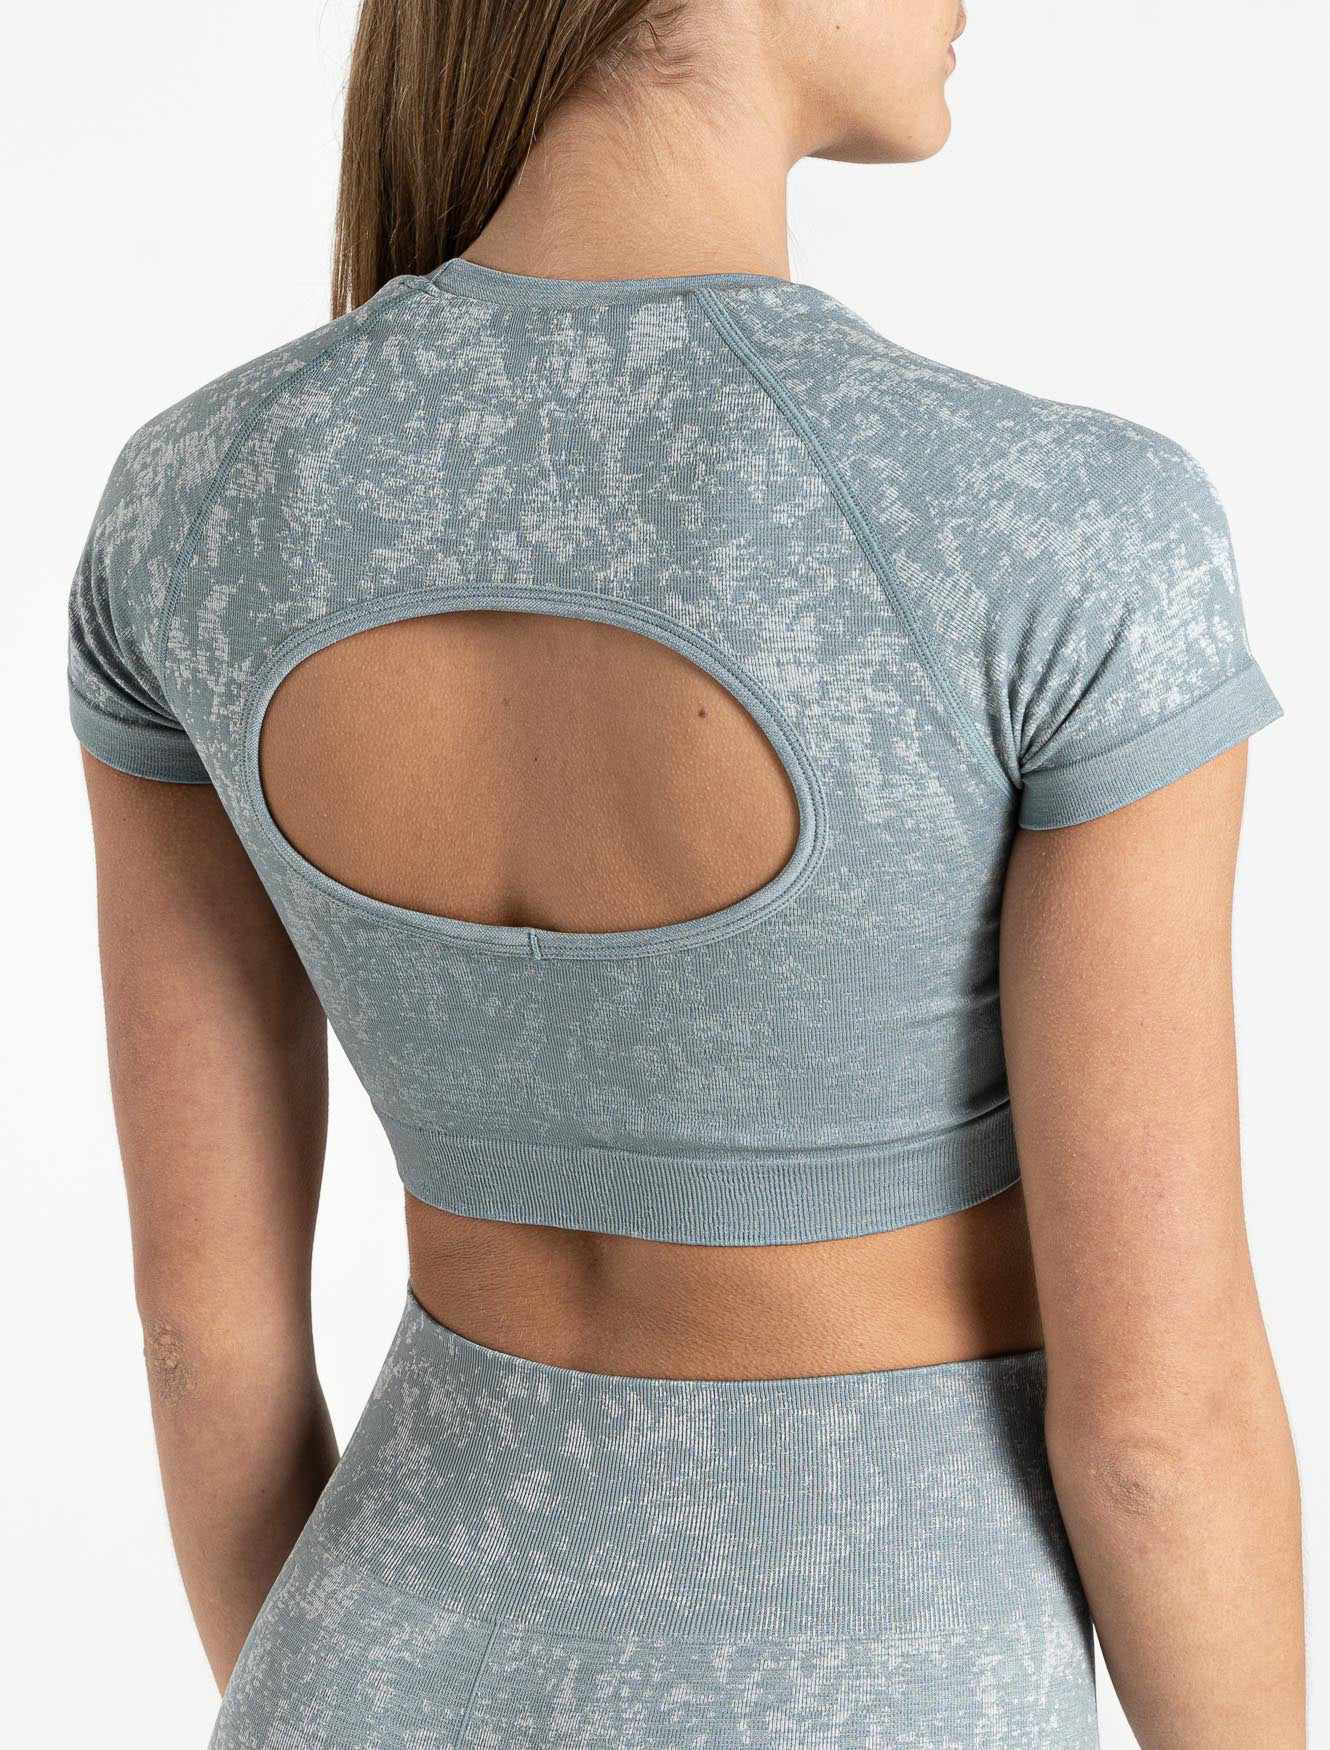 Cosmic Seamless Crop Top / Teal Ombre Pursue Fitness 2